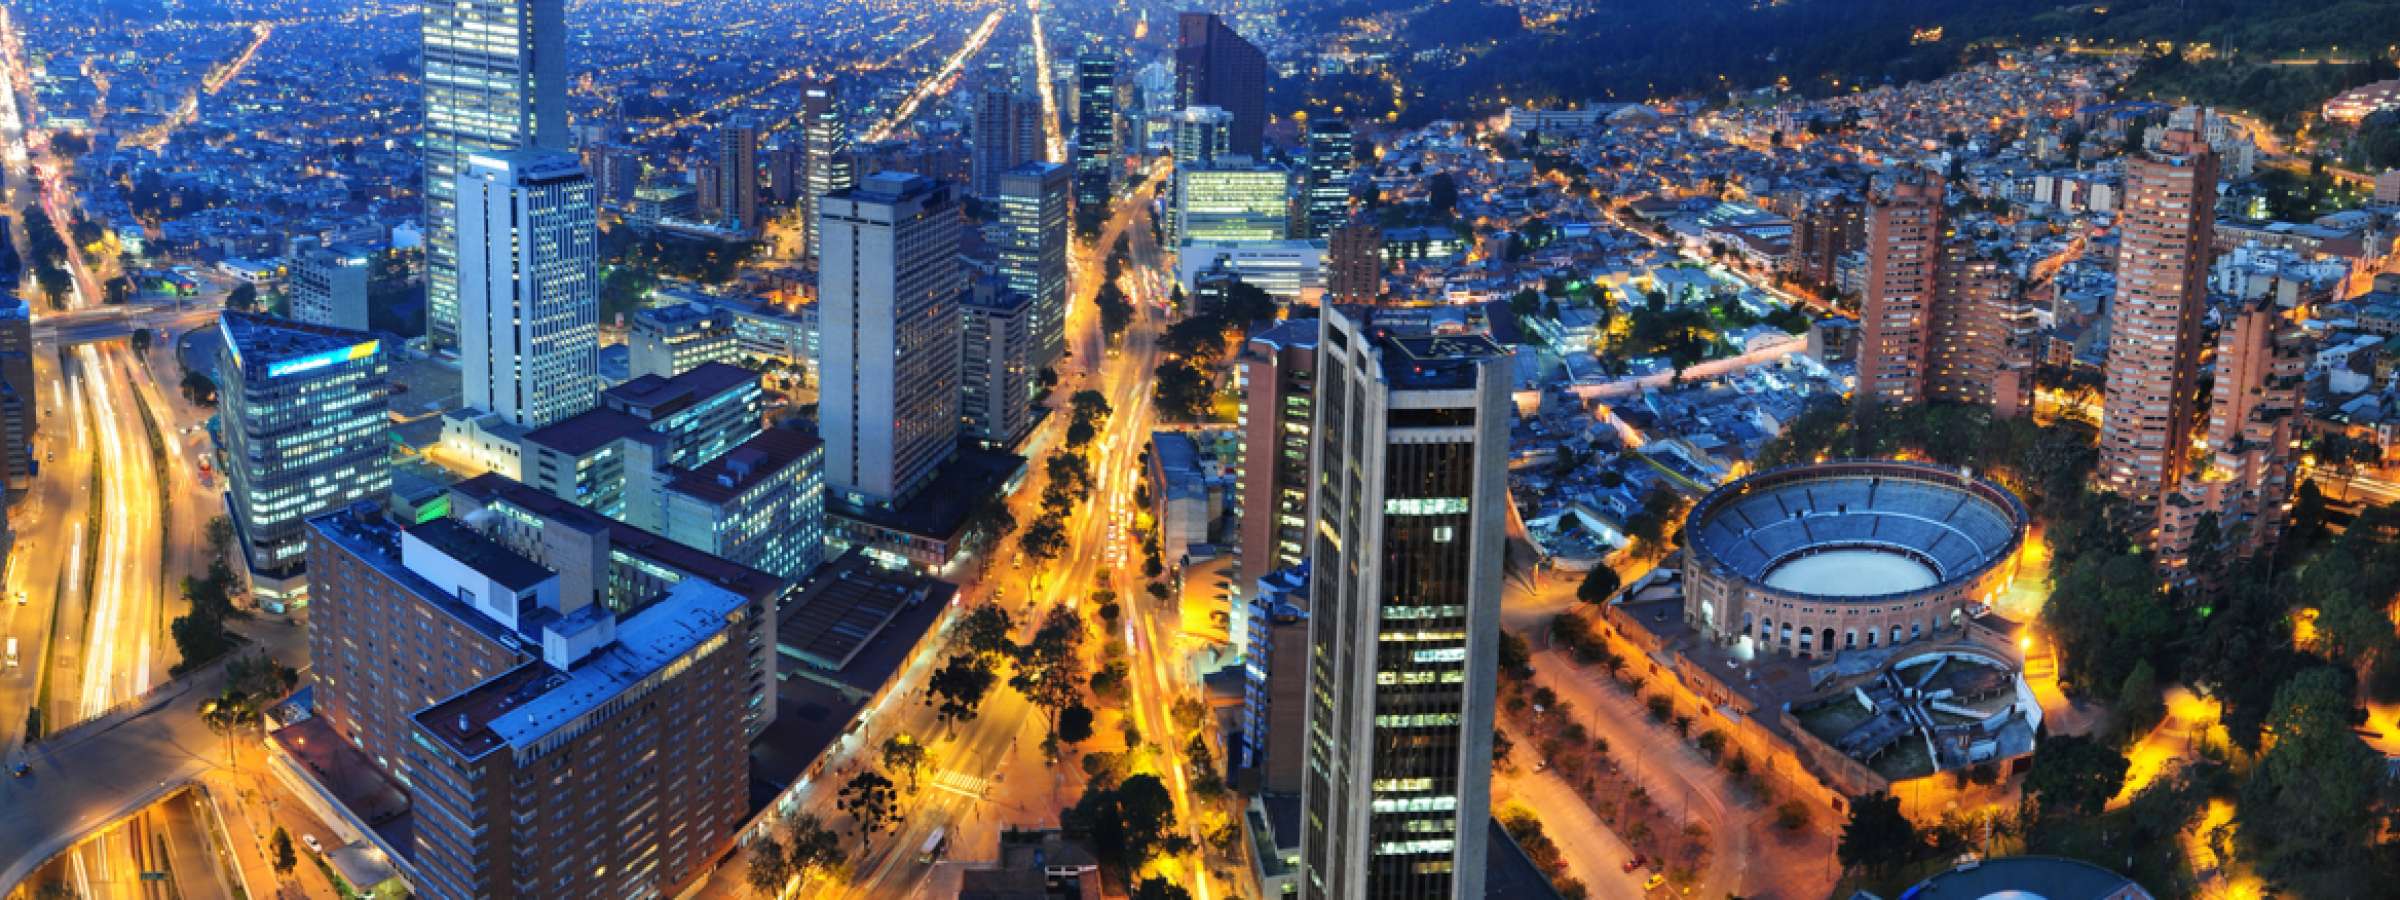 A panoramic view of downtown Bogotá at night